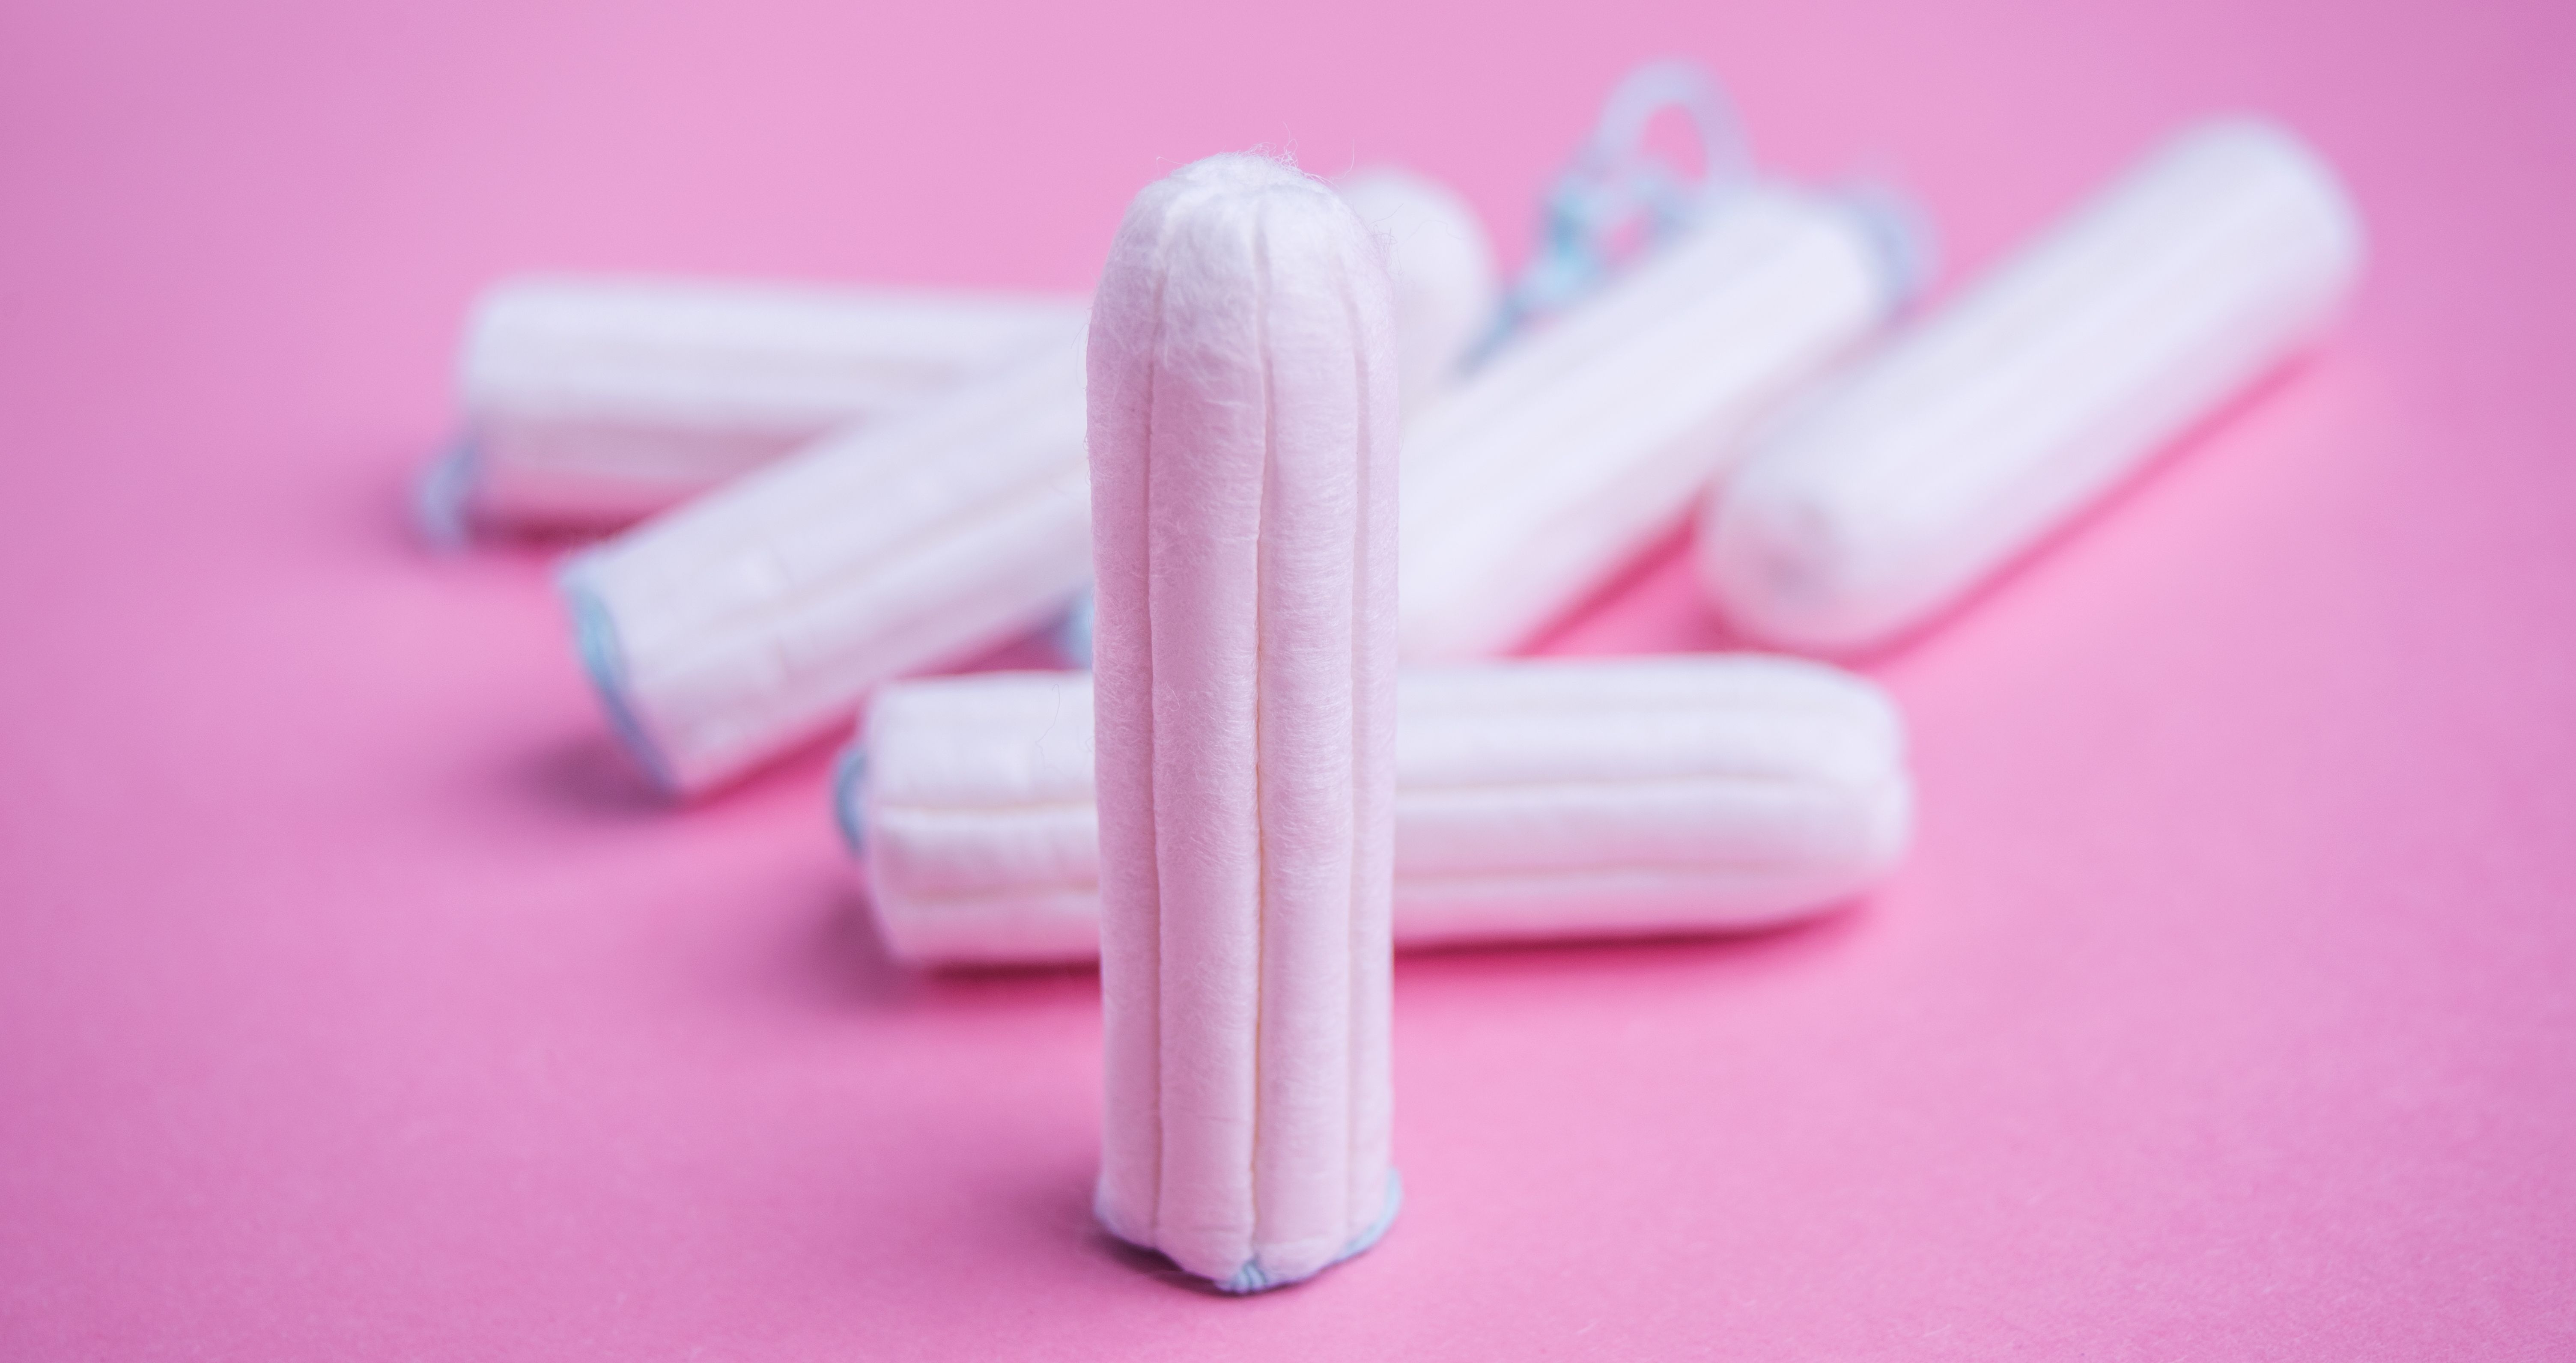 Why Can't You Flush Tampons Down The Toilet?